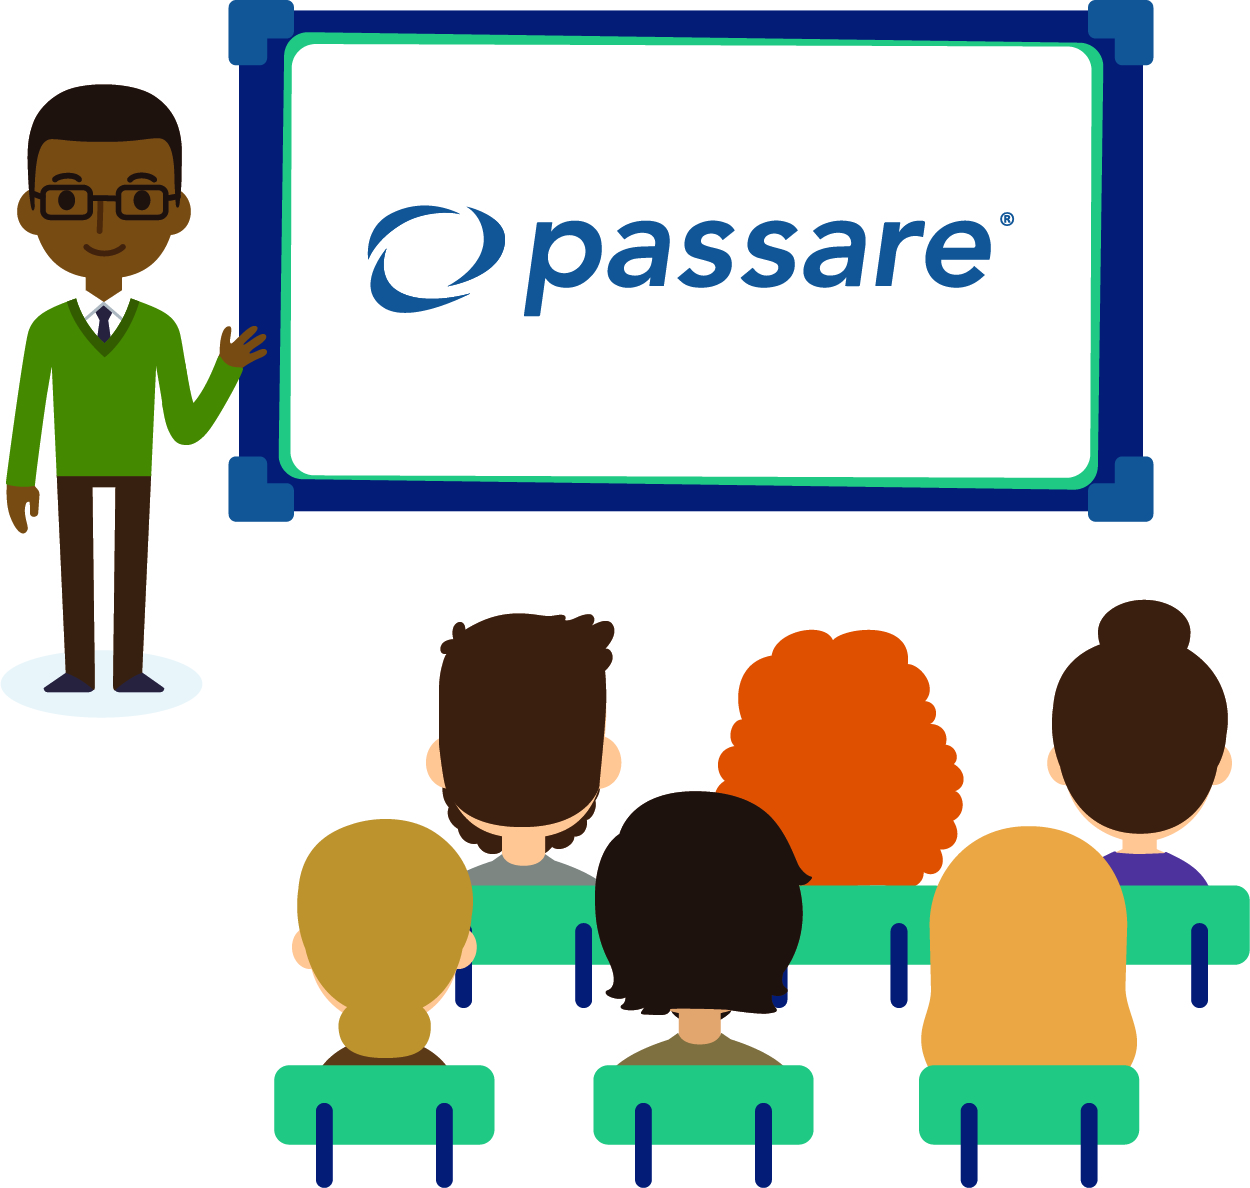 Get Started with Passare in Just 30 Days: Gain Buy-In from Your Team